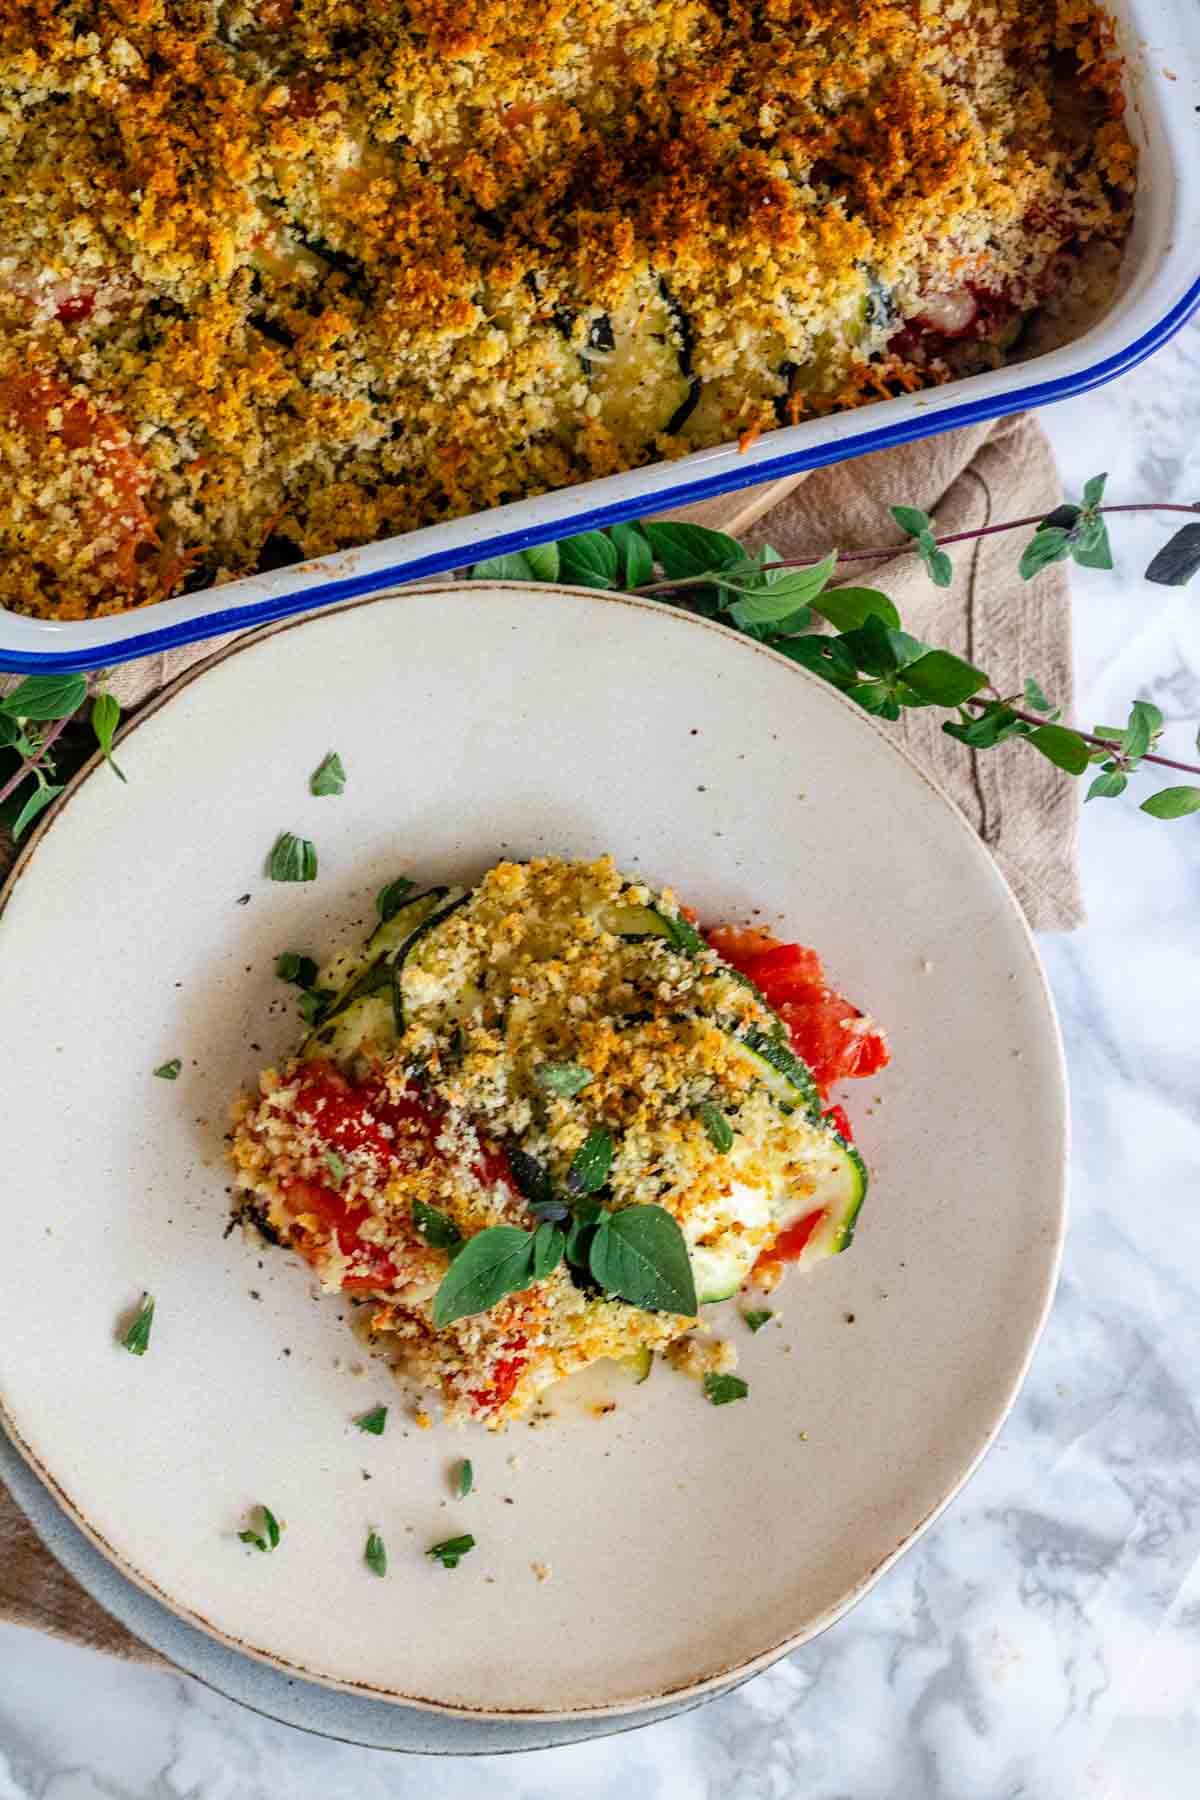 A baked casserole on a plate topped with browned bread crumbs and oregano leaves.